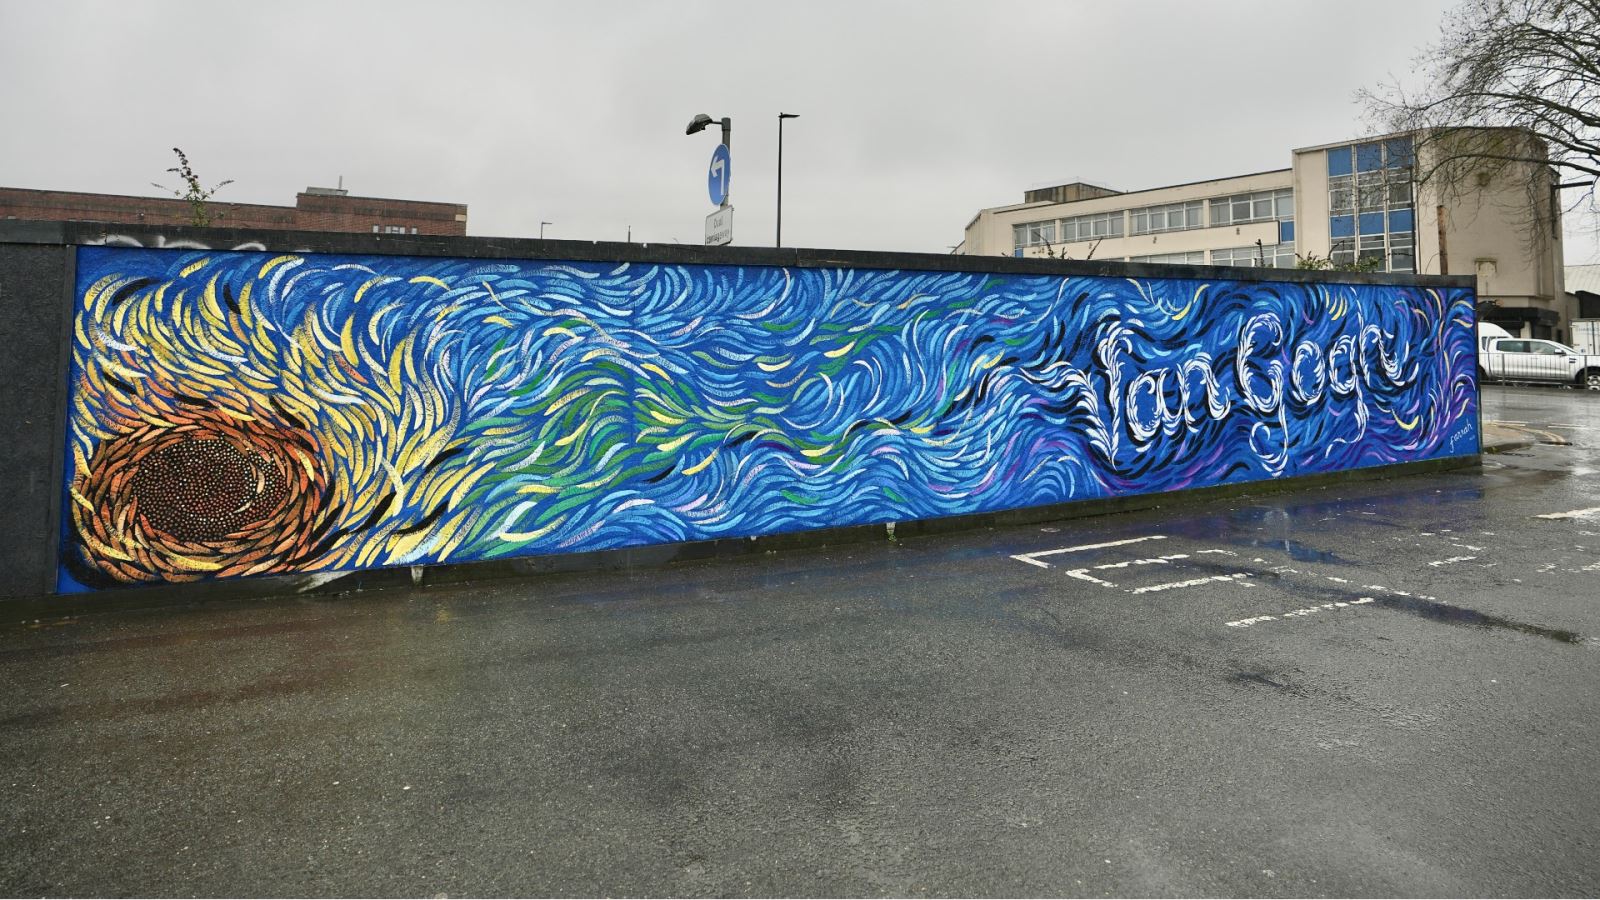 Van Gogh city art trail launches, starting with Sunflower-inspired mural at Temple Meads